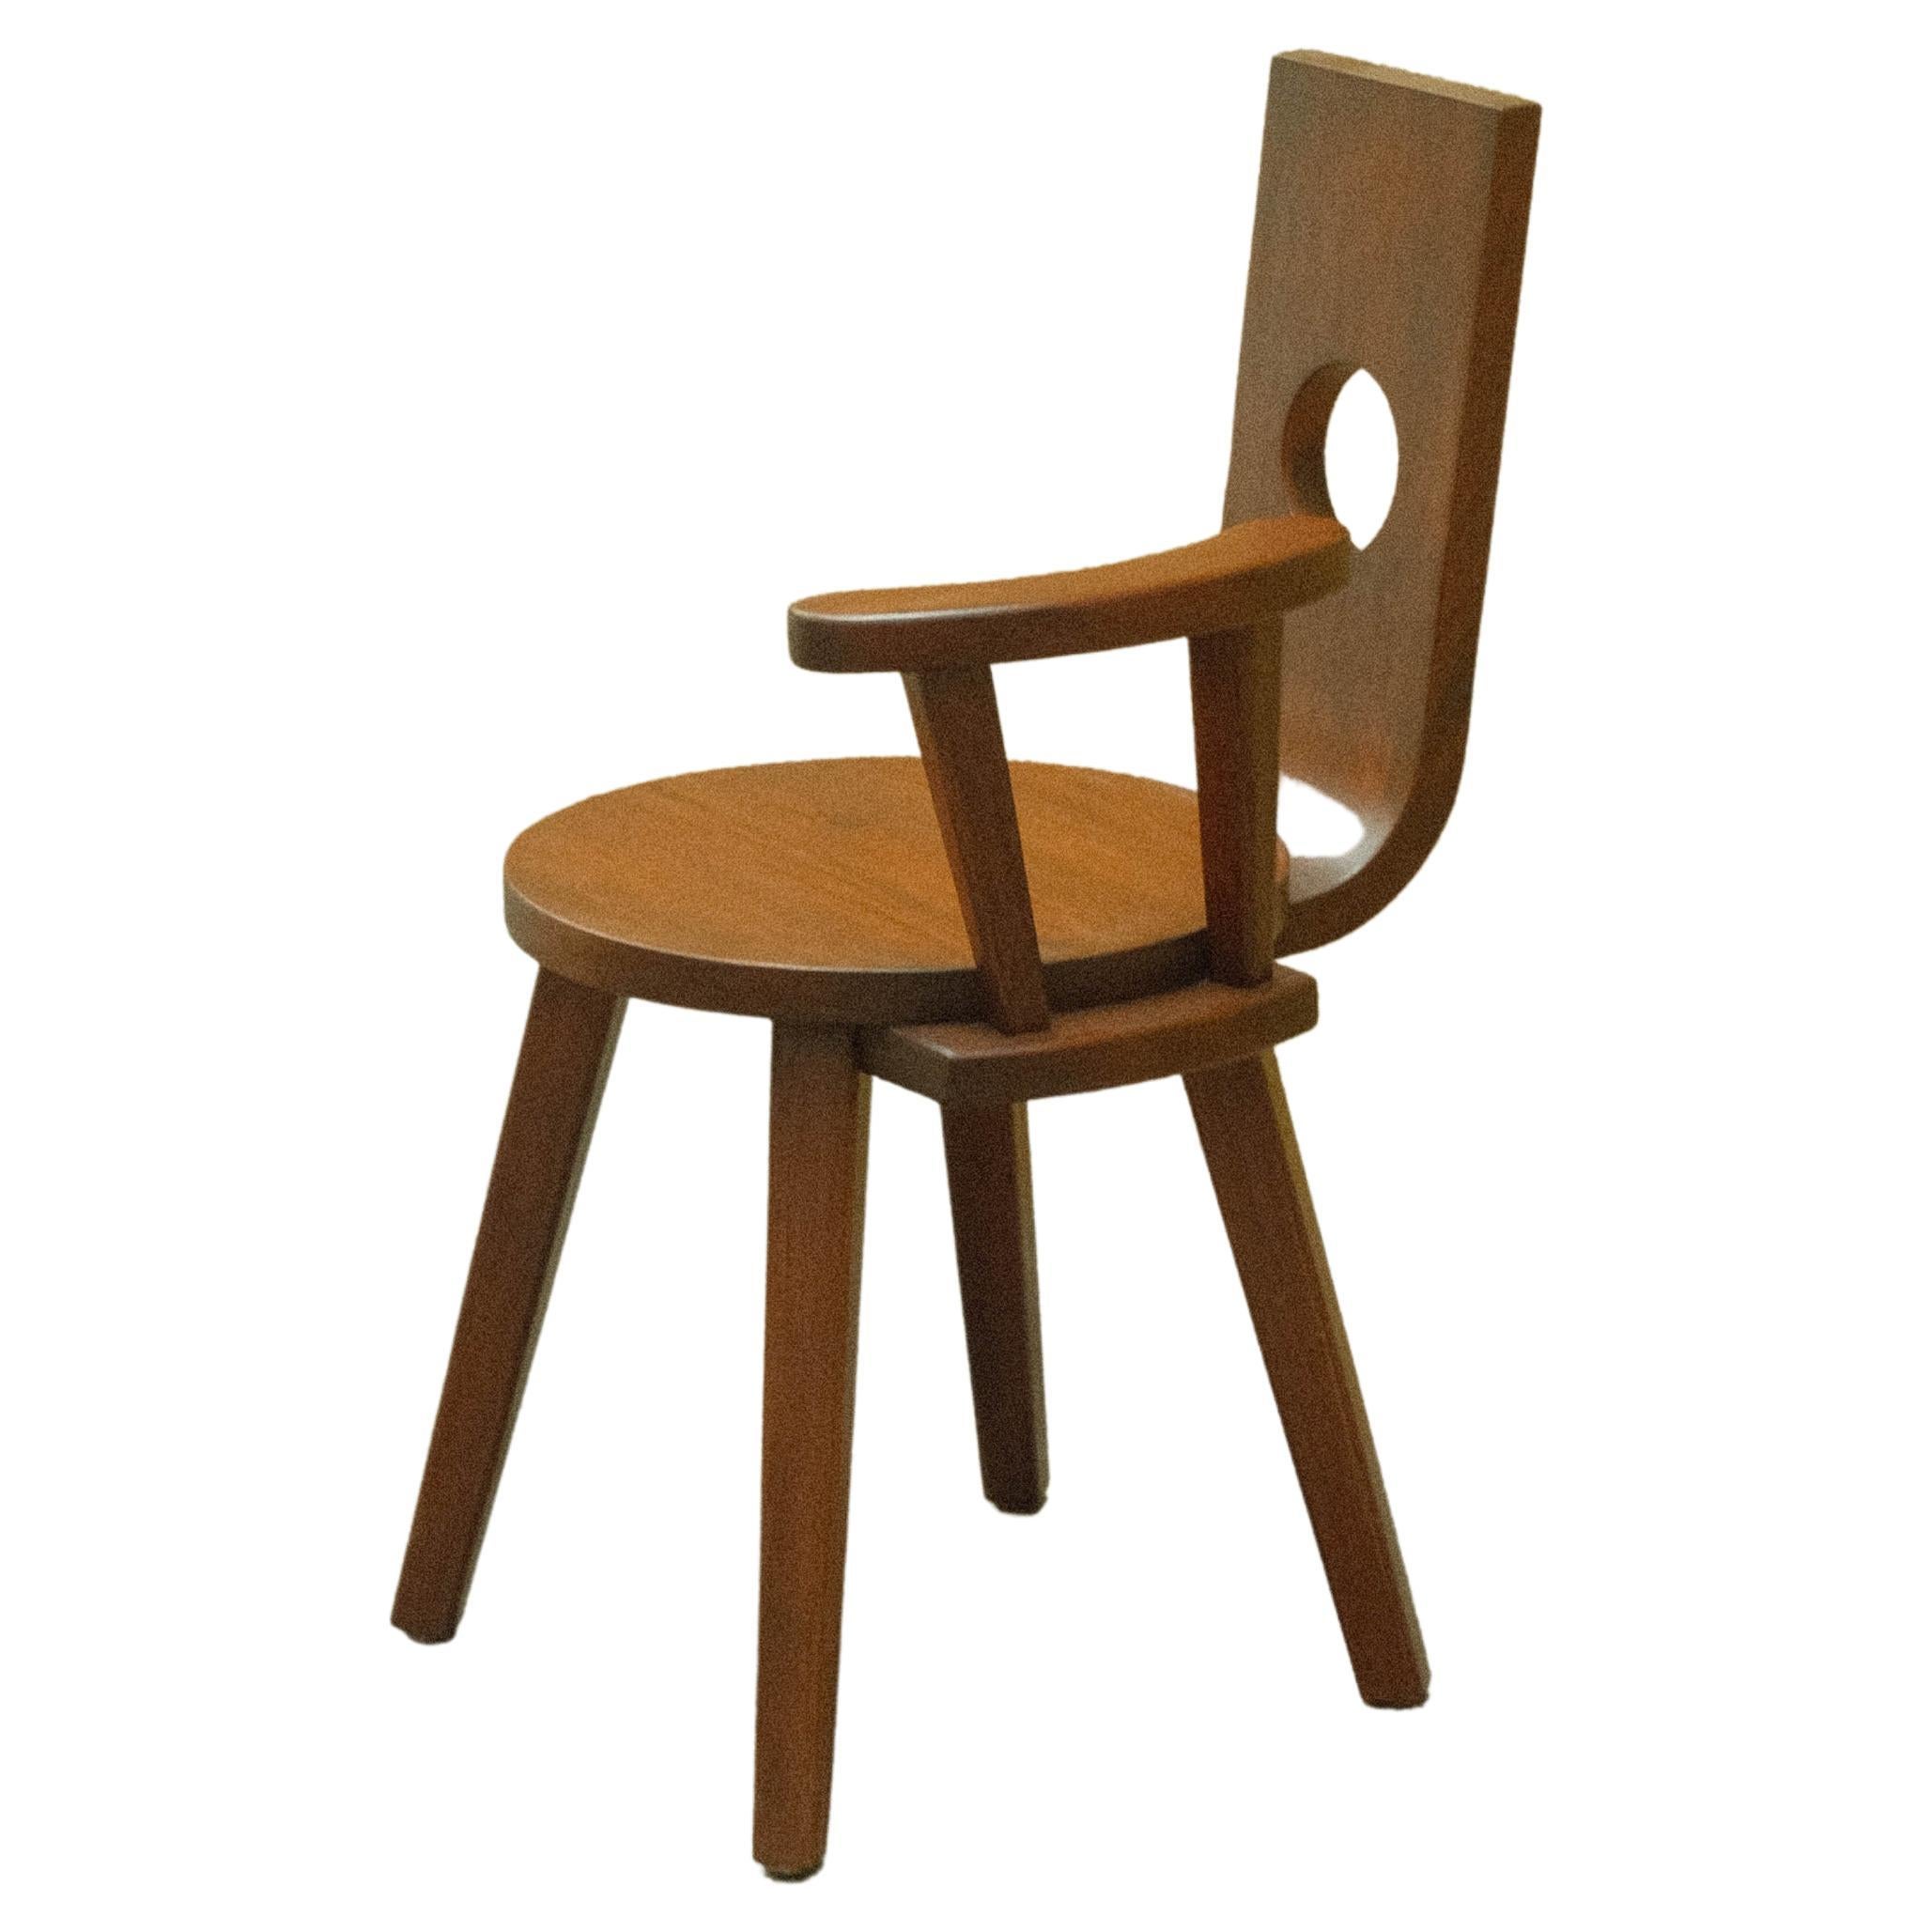 Solid Wood Dining Chair / Accent Chair / Chair-05 by Dalisay Collection